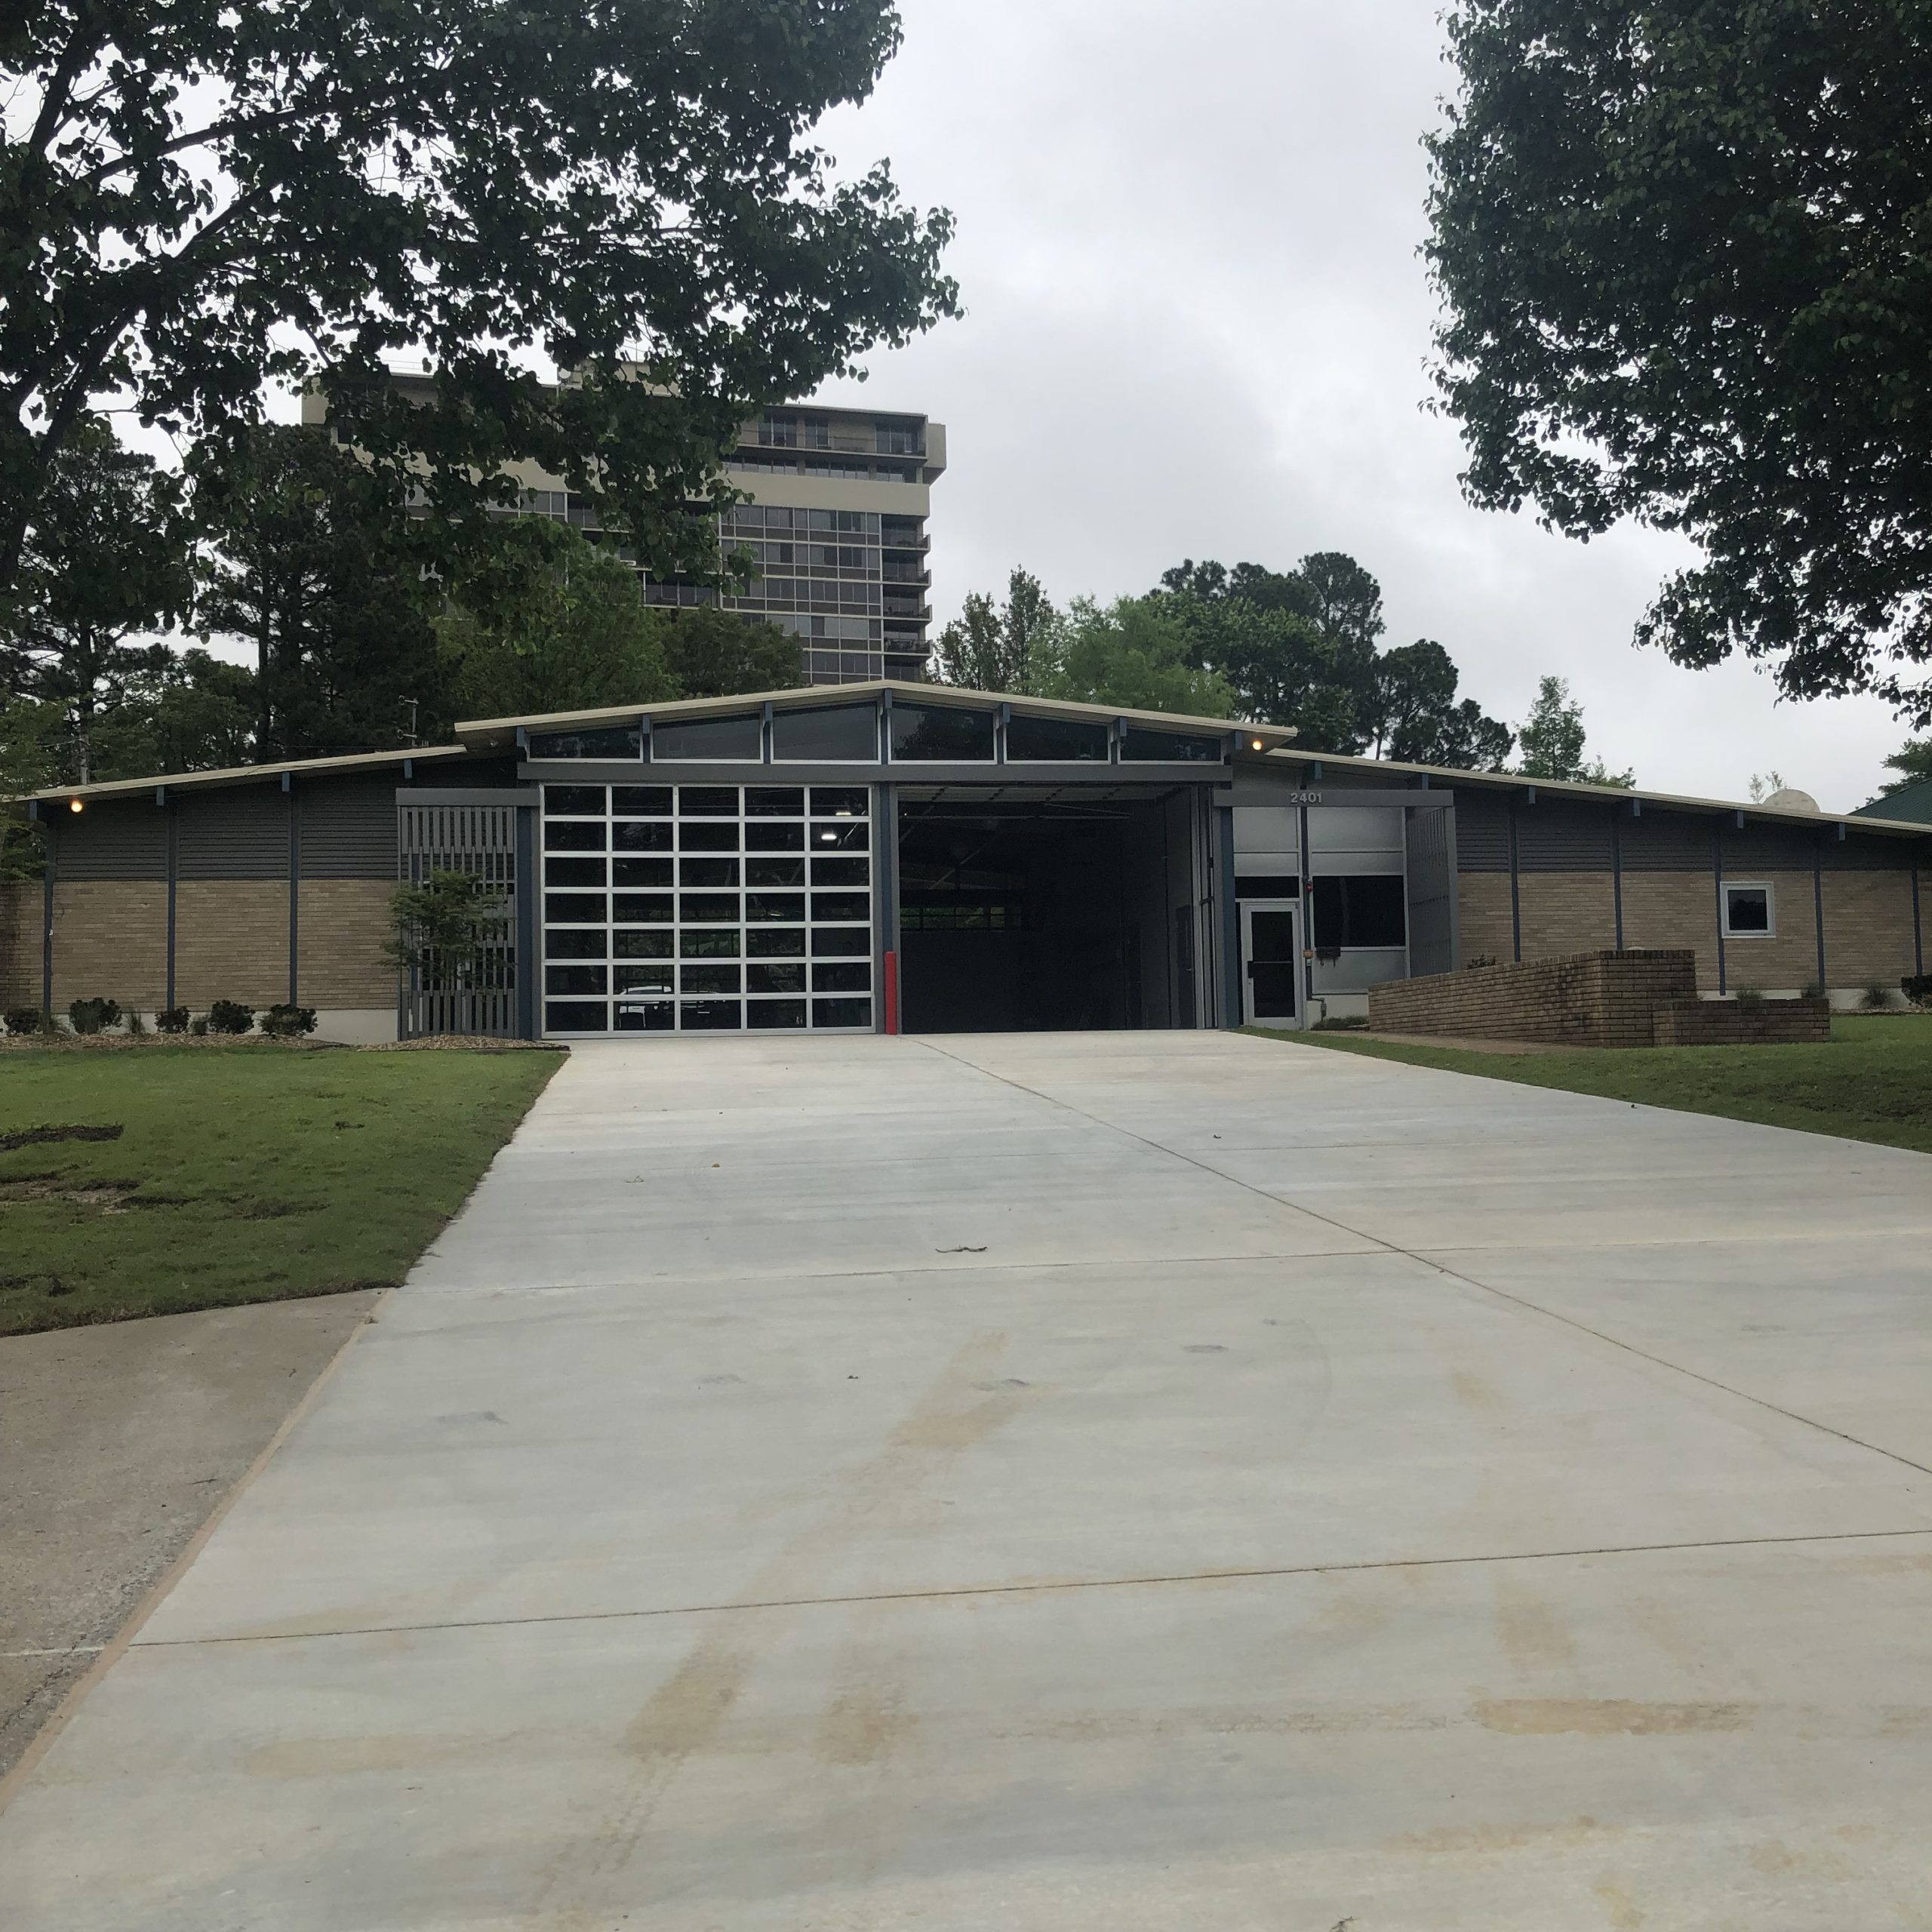 Fire Station No. 7 – City of North Little Rock